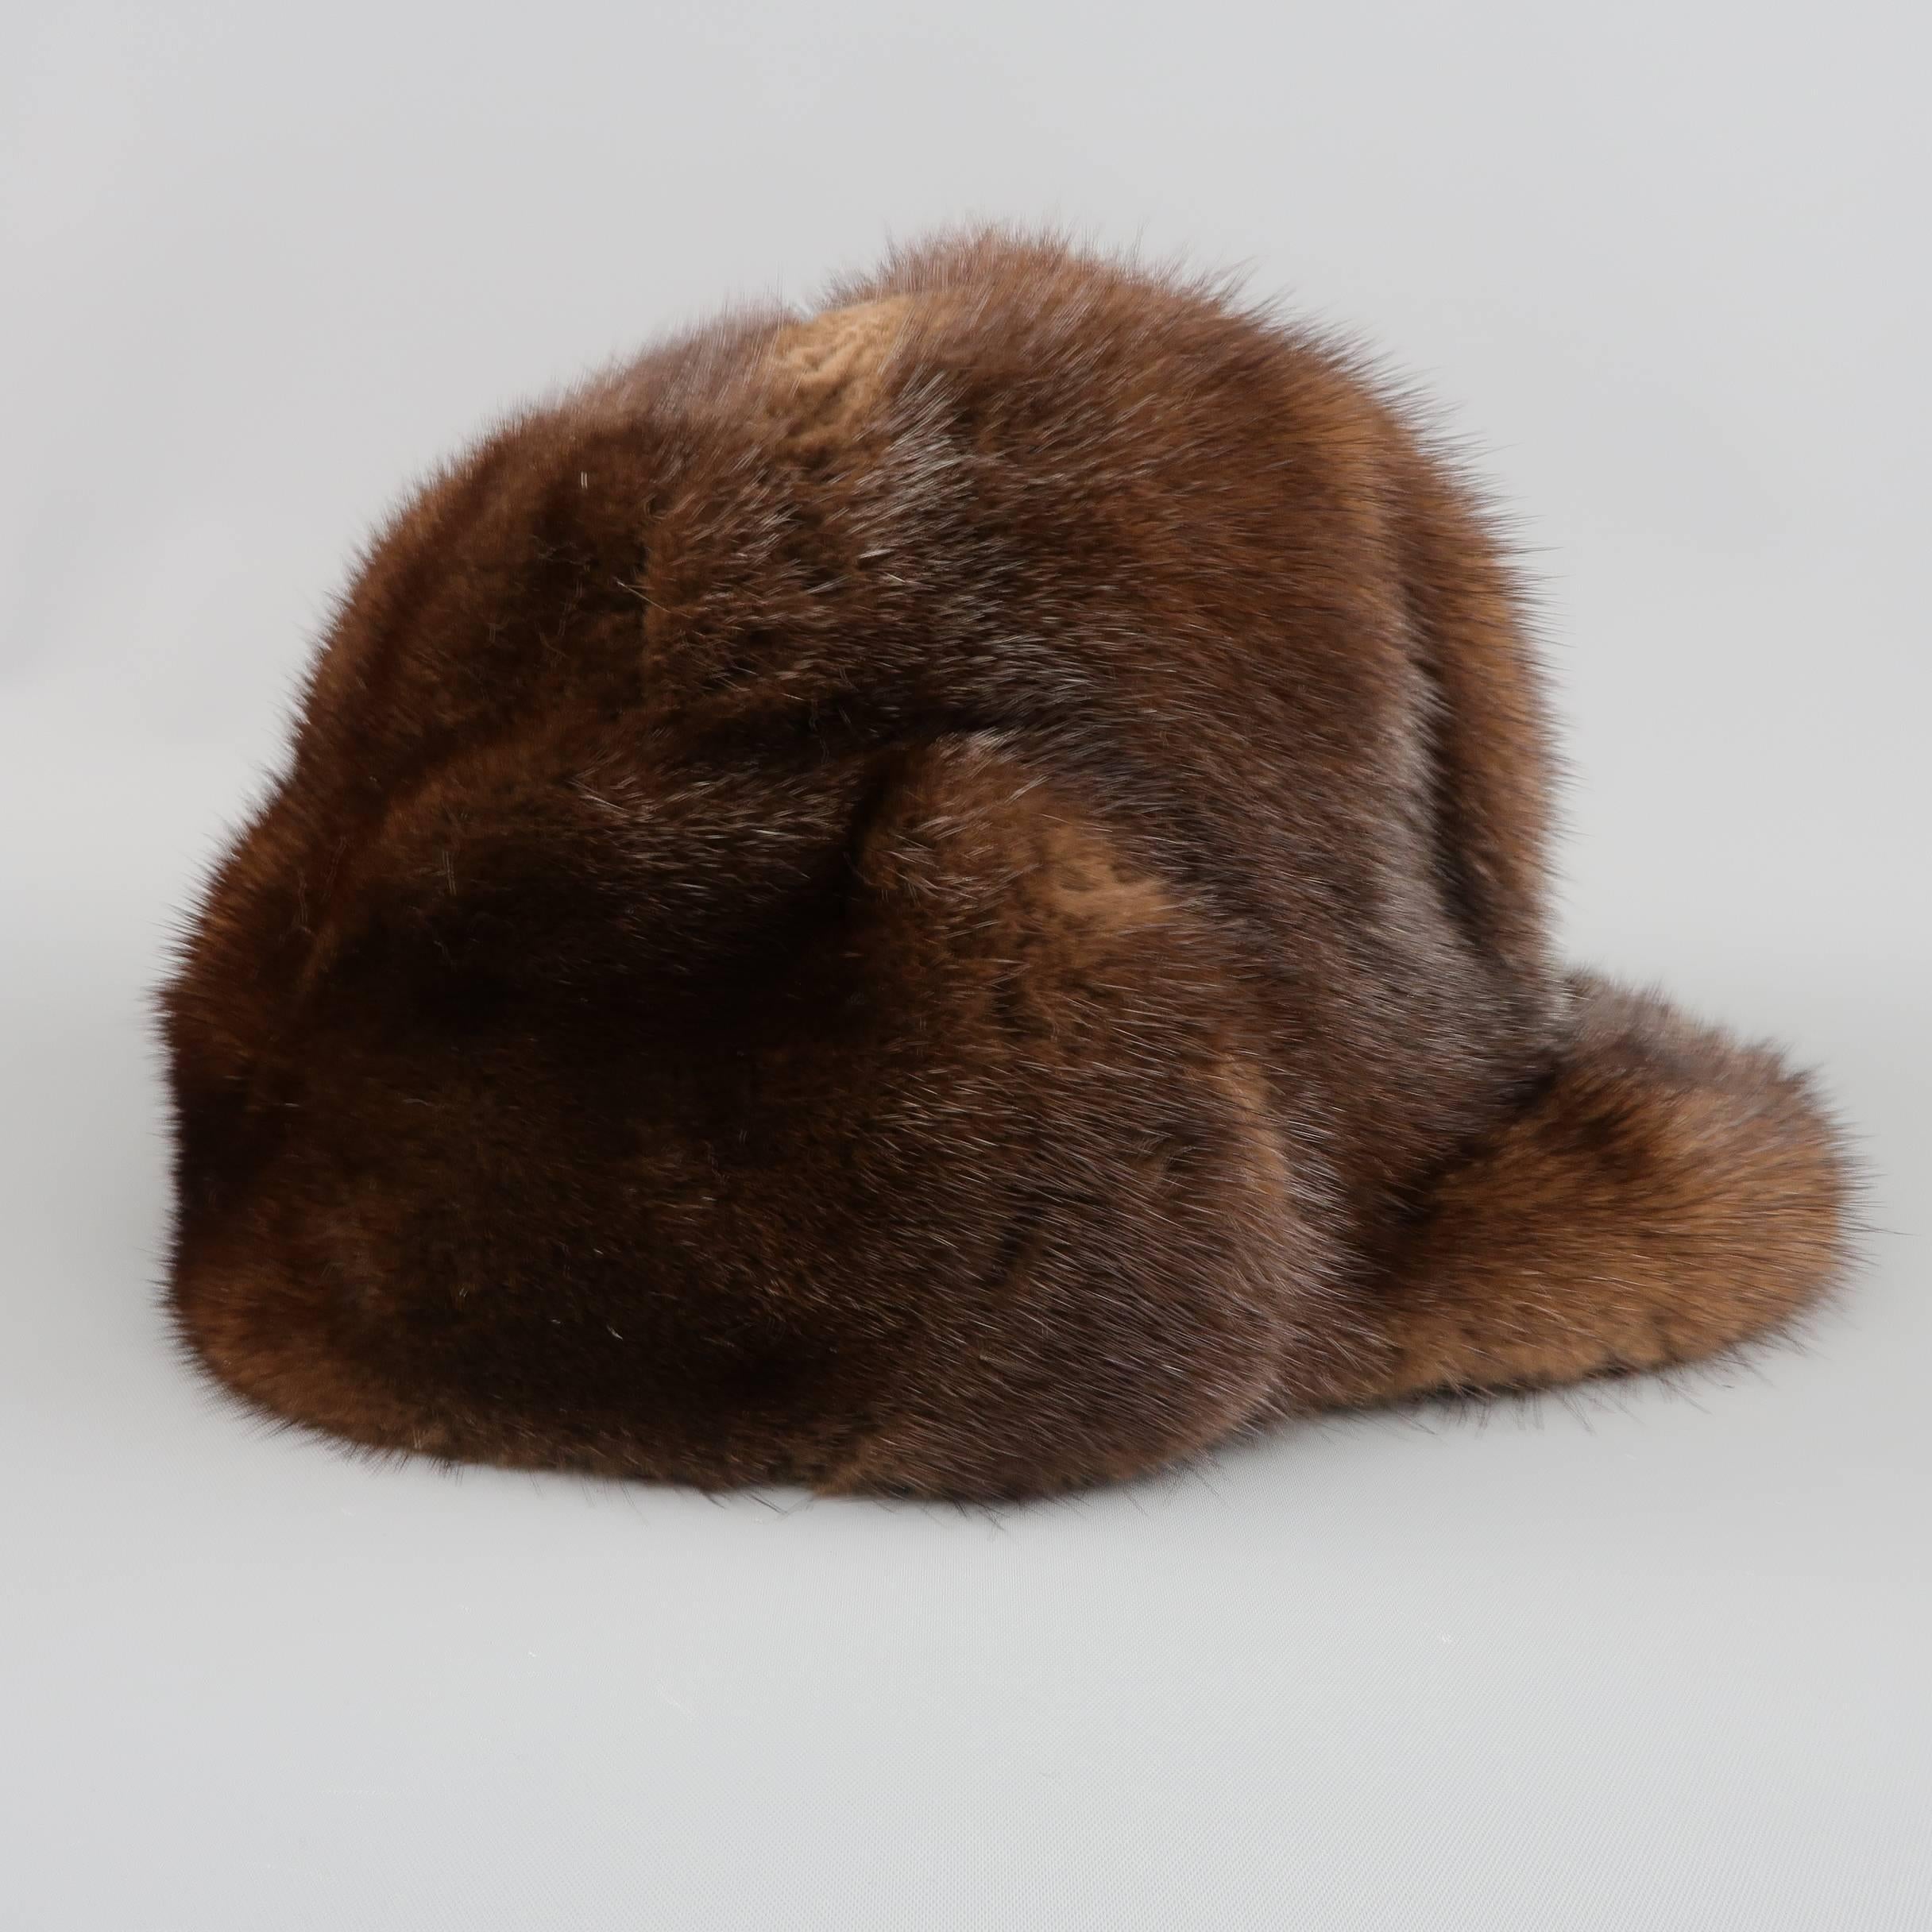 Vintage winter cap in brown mink fur with a brim and knit era cover. Wear on fur and lining. As-Is.
 
Fair Pre-Owned Condition.
 
Fits: 23 in.
Height: 6.5 in.
Brim: 2.5 in.

SKU: 83681